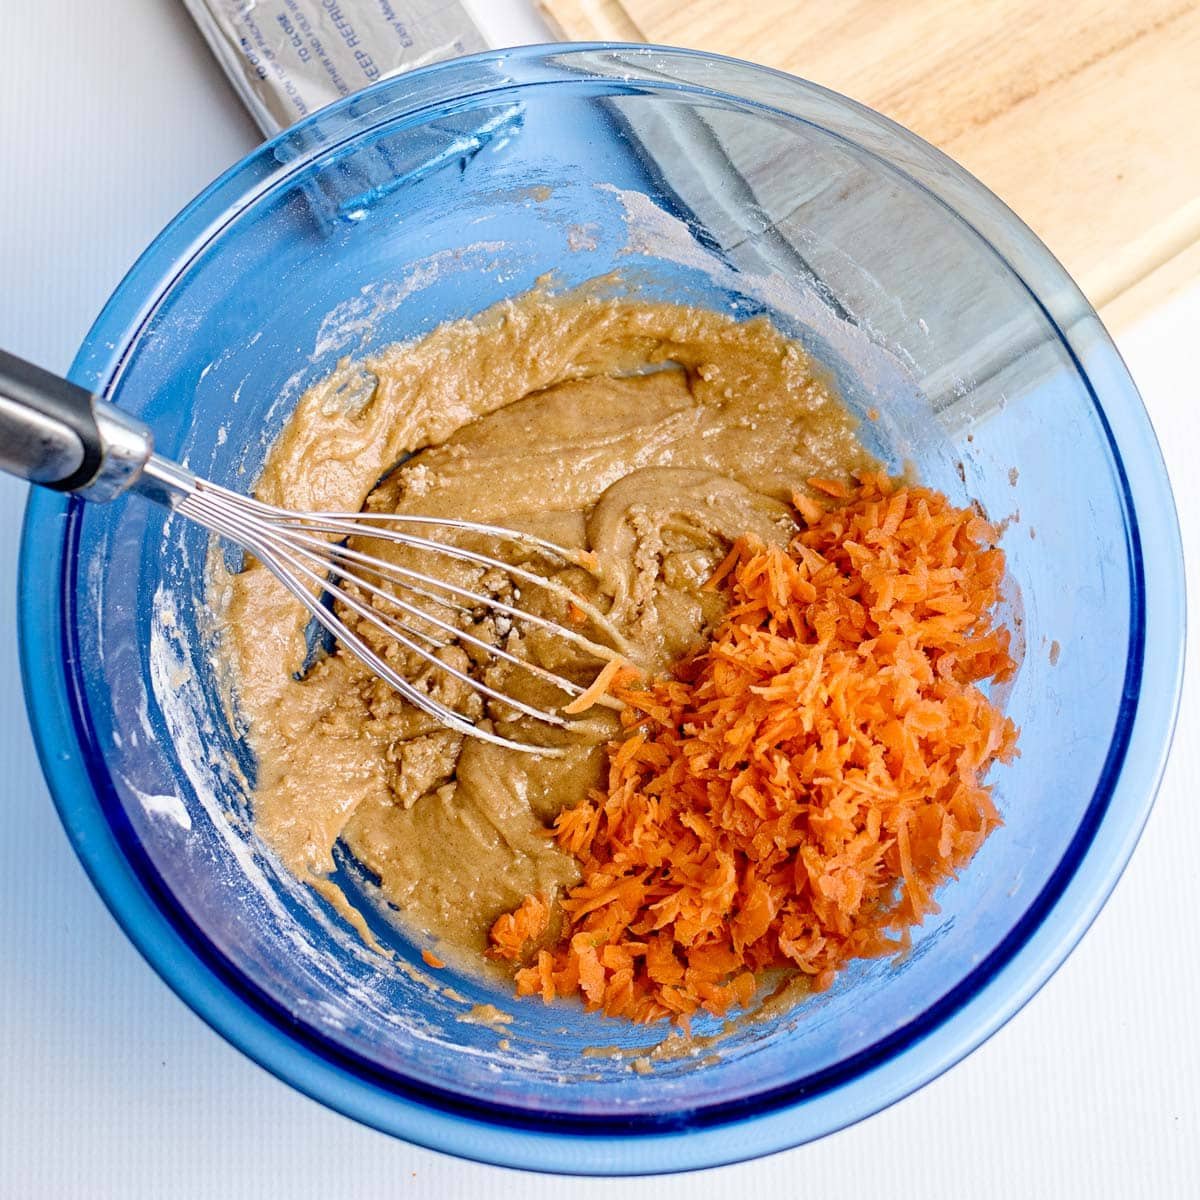 grated carrots over carrot cake batter in a bowl